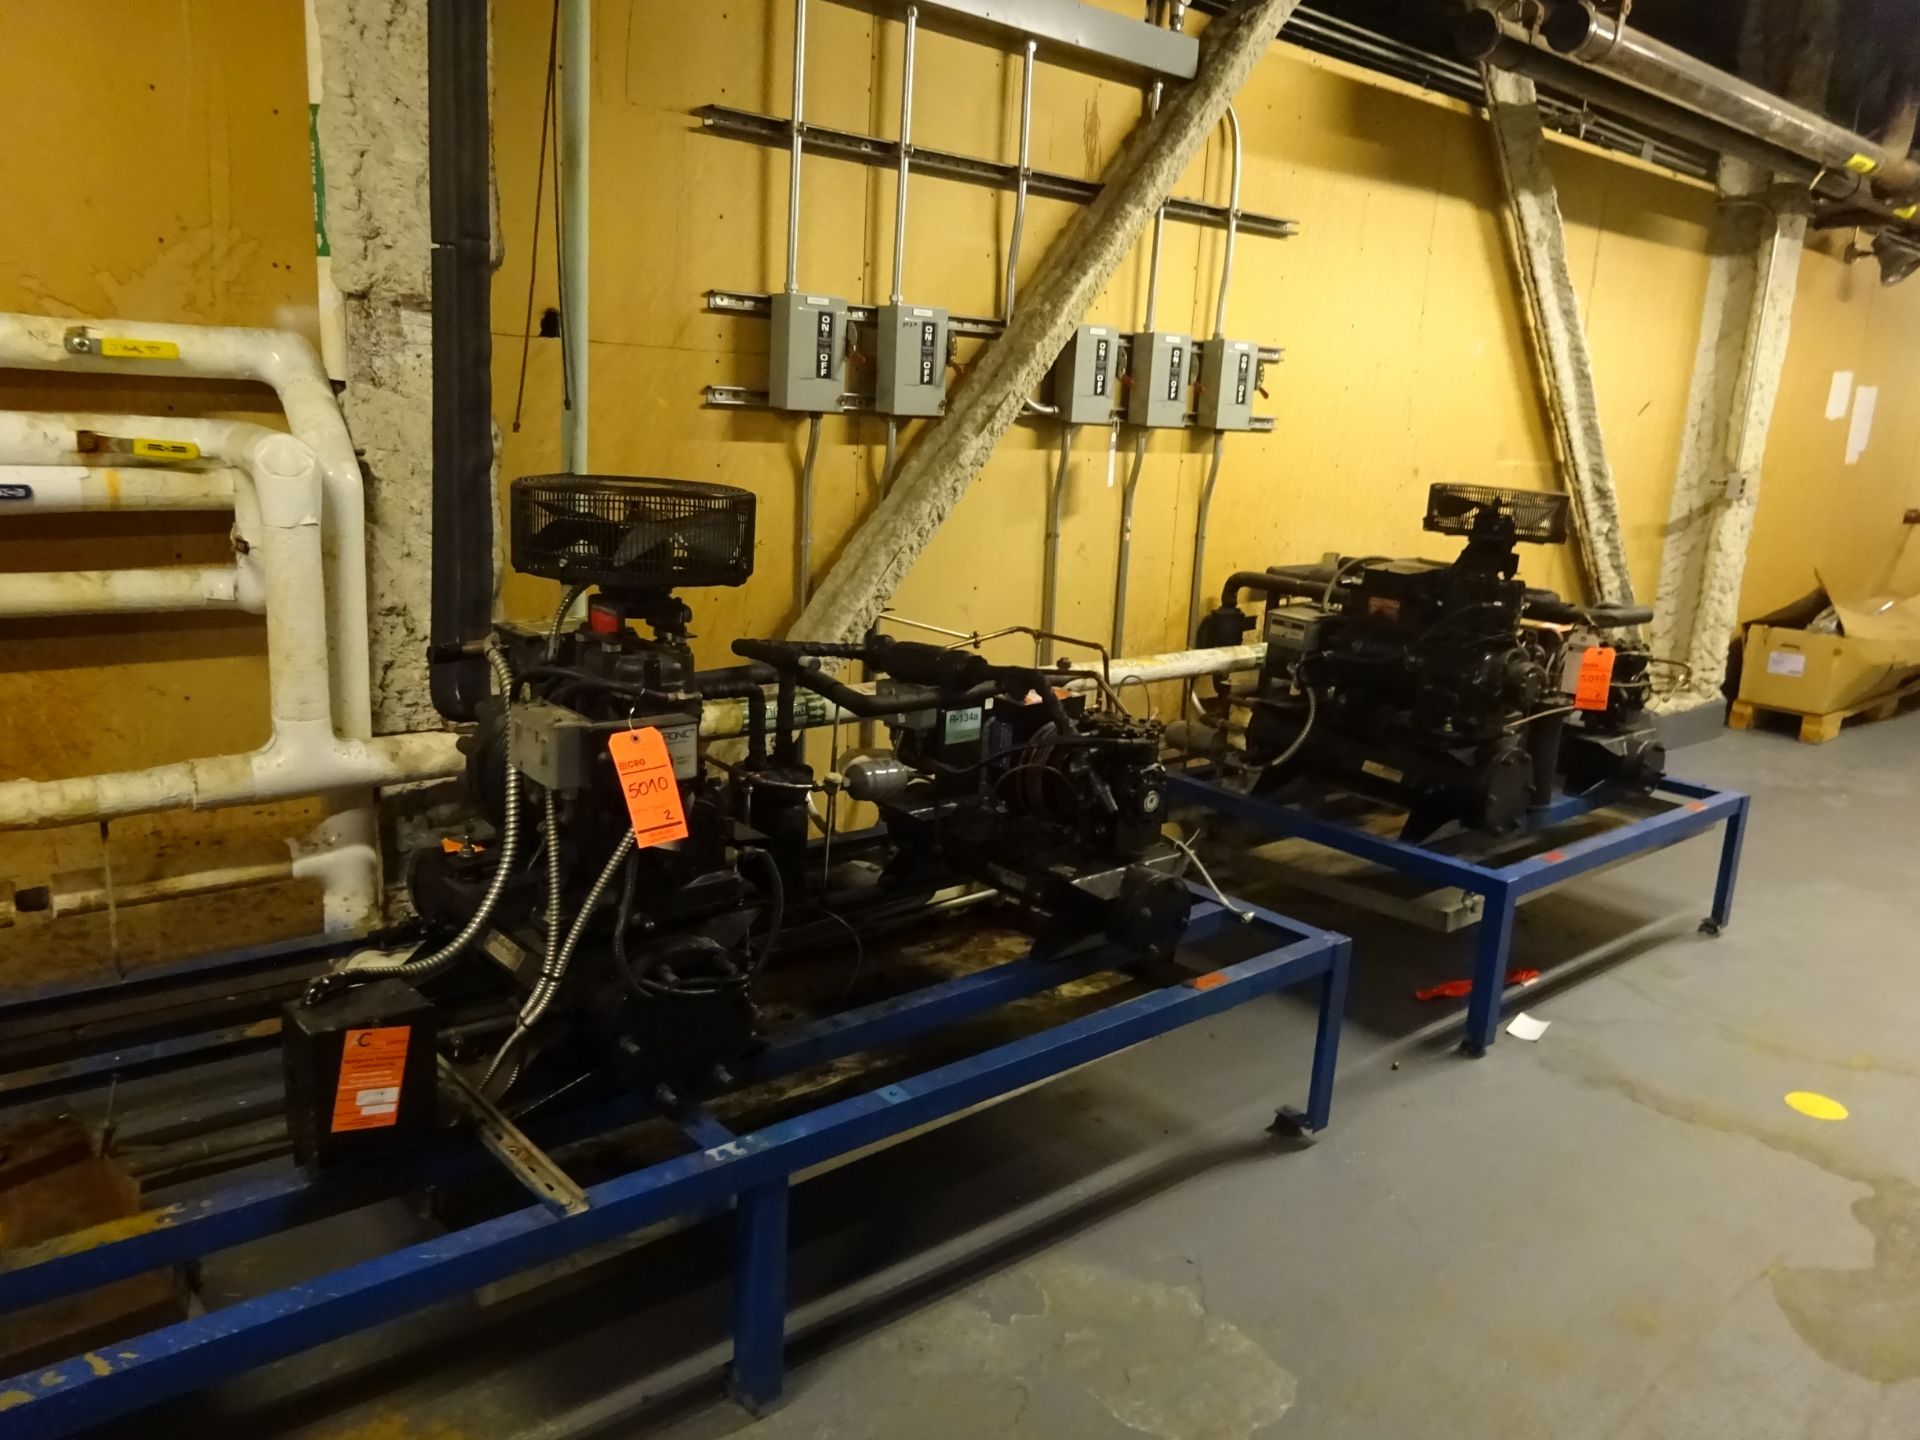 Lot of (3) Copeland Model # W4WL-0300 TFC-050 refrigerator compressors, skid mounted R134A - Image 2 of 2